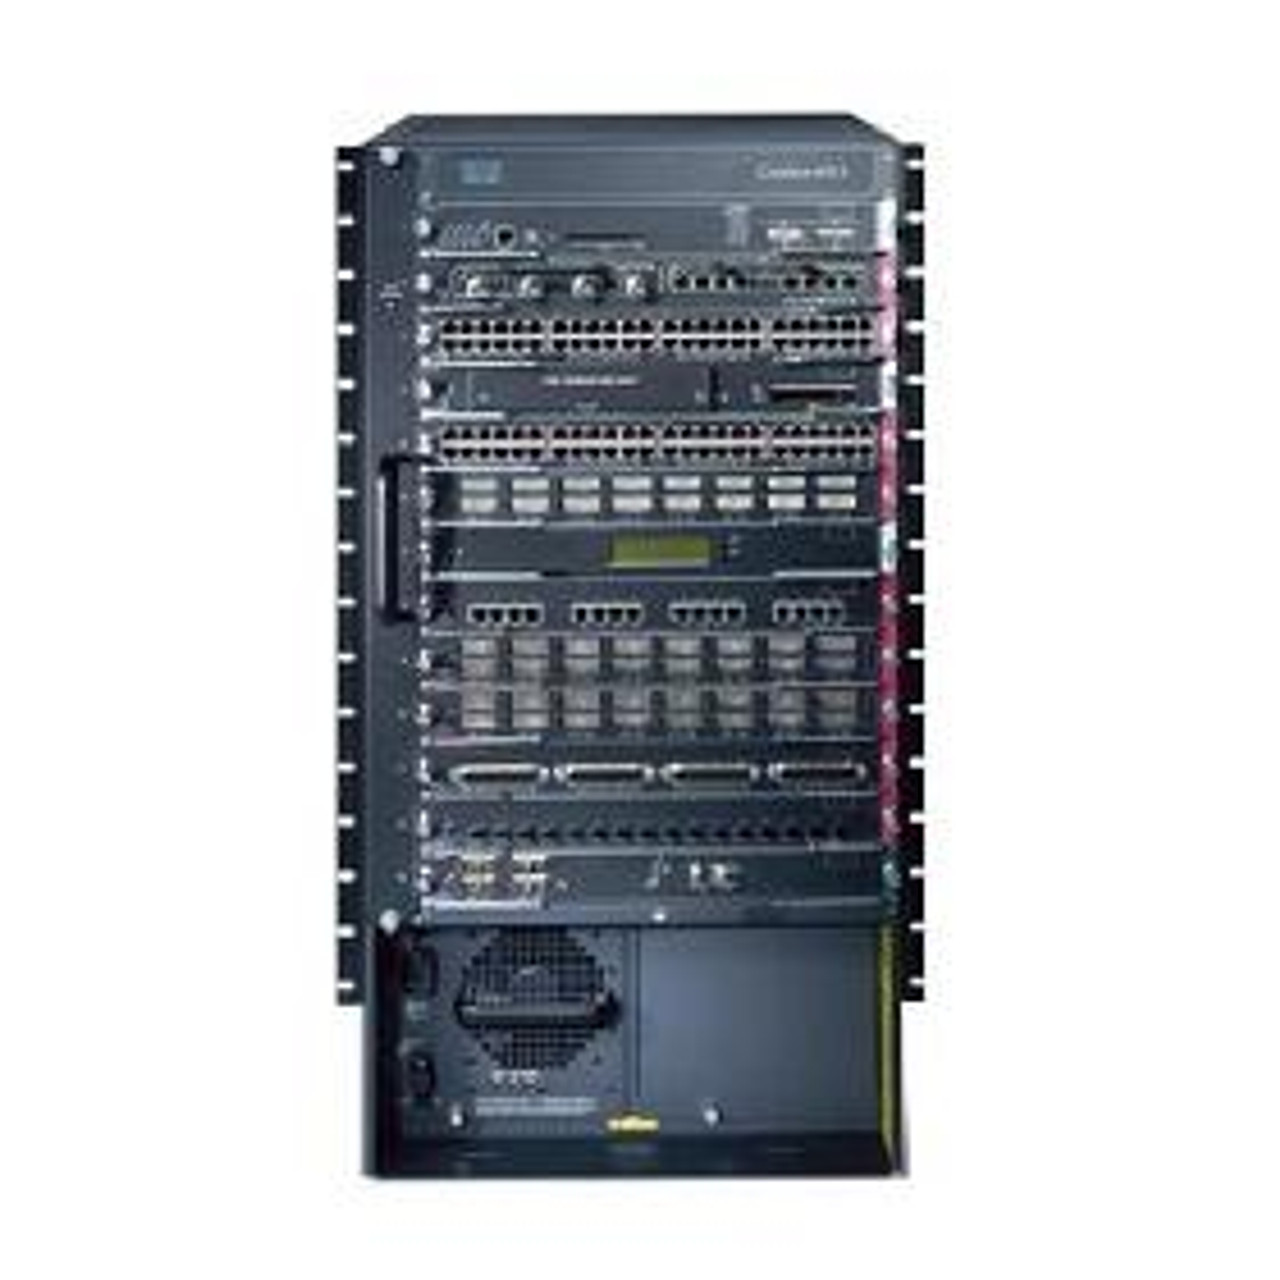 Cisco Catalyst 6513 Switch Chassis